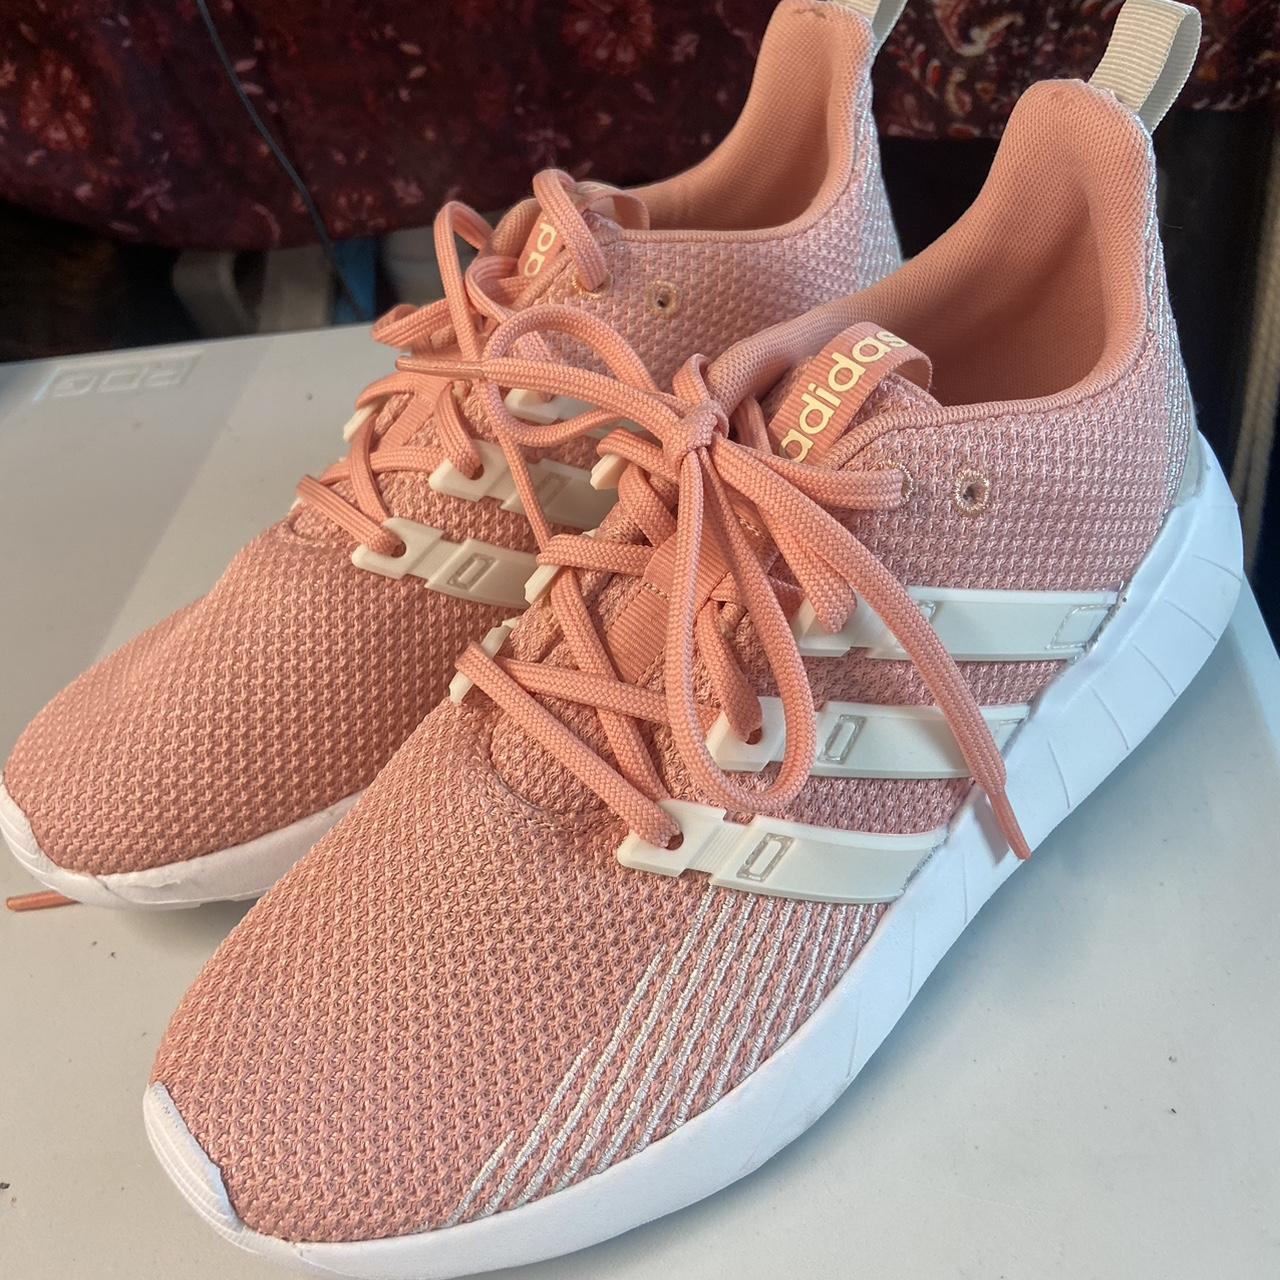 Adidas Women's Pink and White | Depop